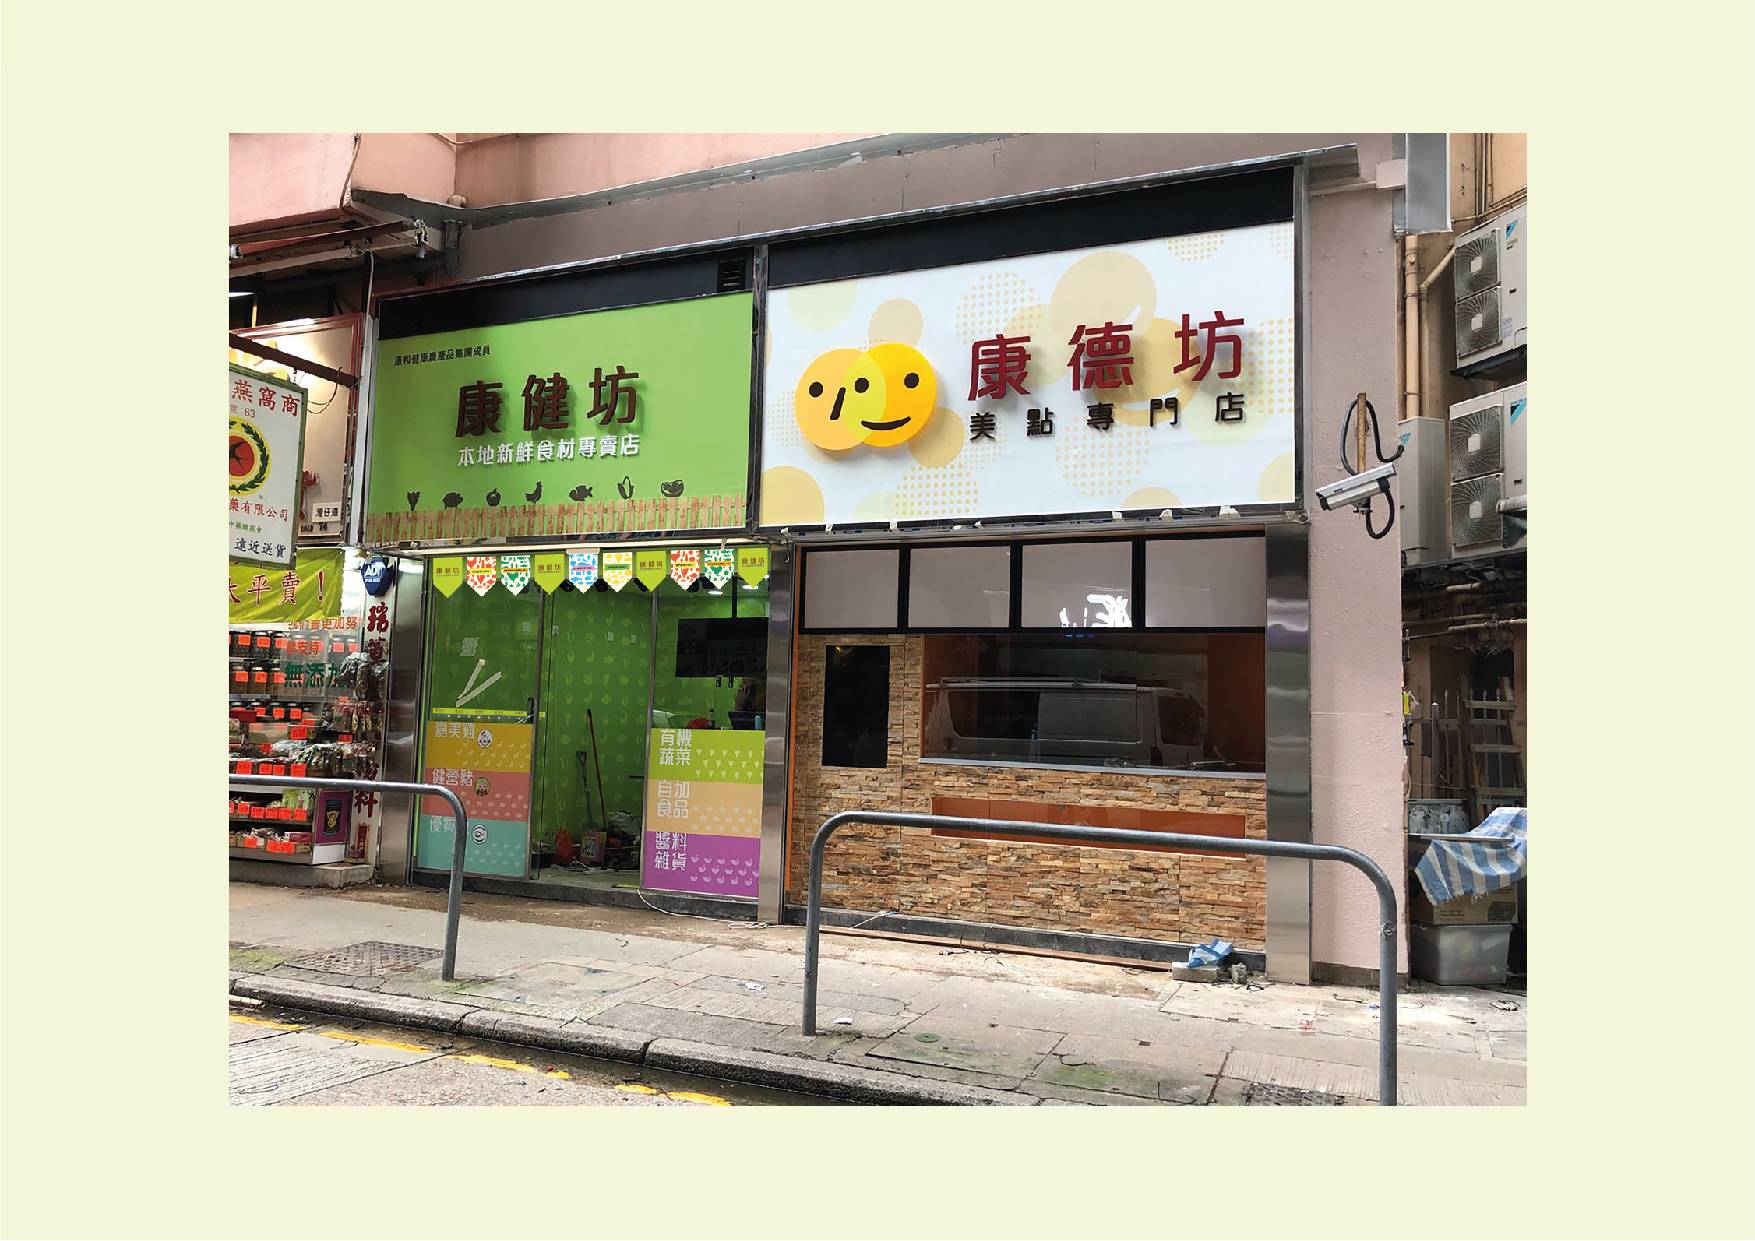 Ka Mei Chicken rebranding for store image and signage